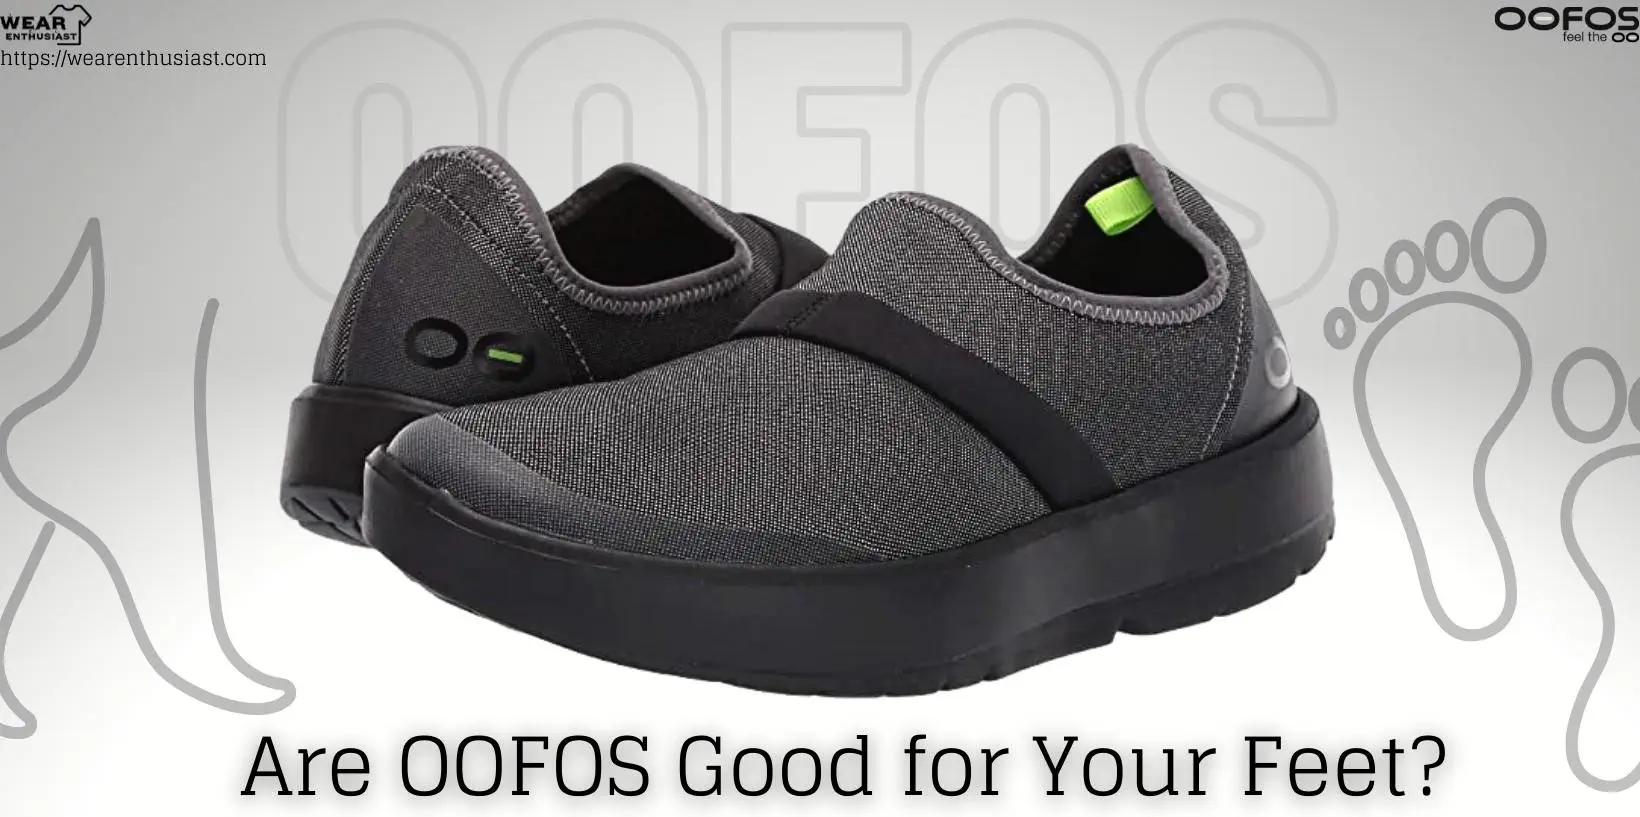 Are OOFOS Good for Your Feet?